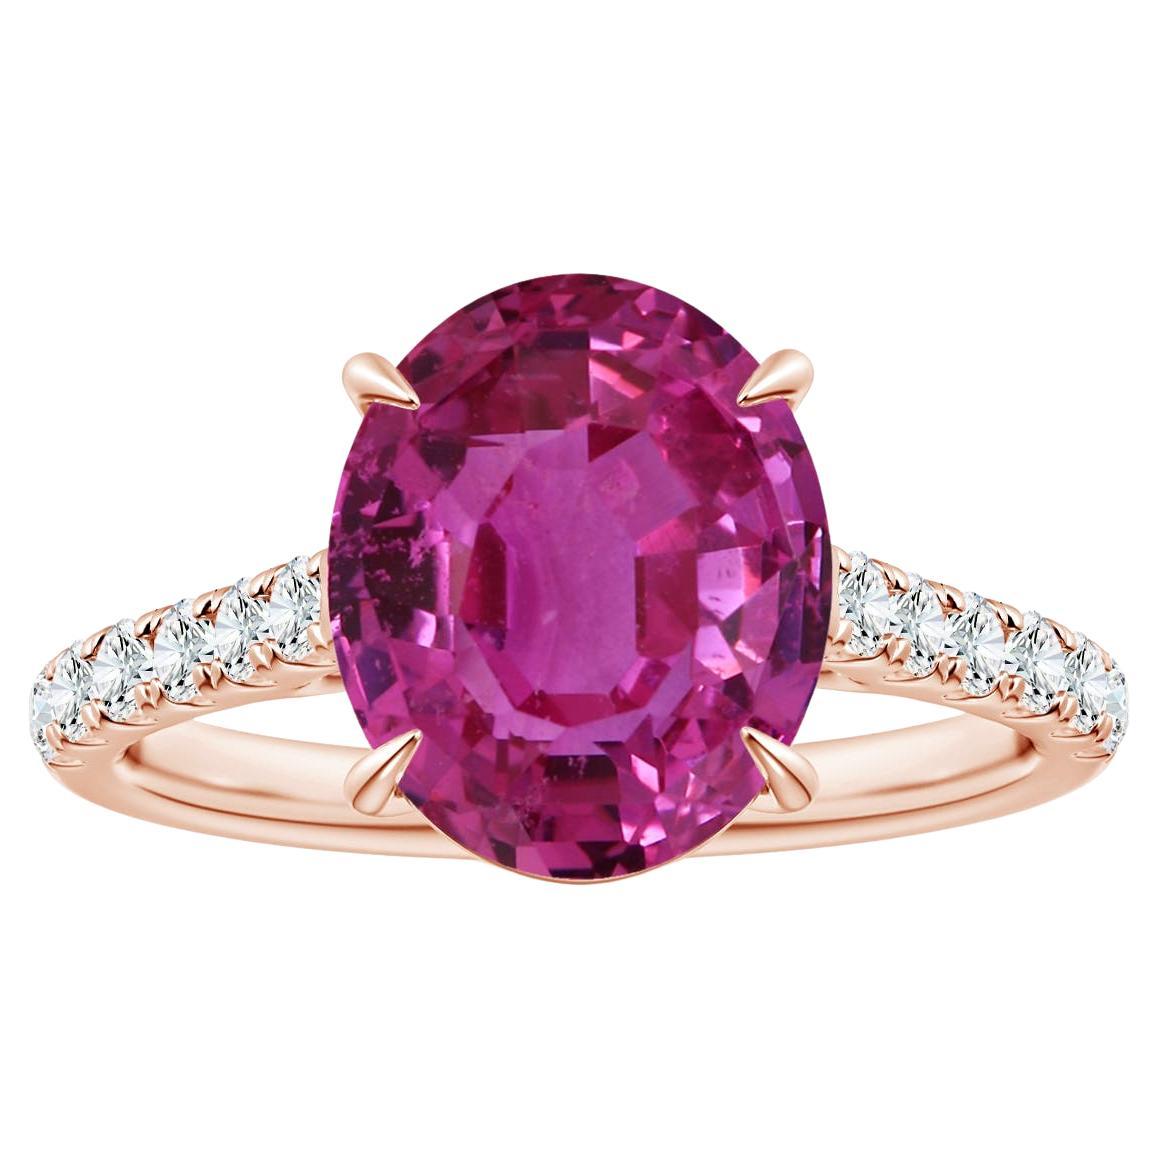 For Sale:  ANGARA Claw-Set GIA Certified Oval Pink Sapphire Ring in Rose Gold with Diamonds